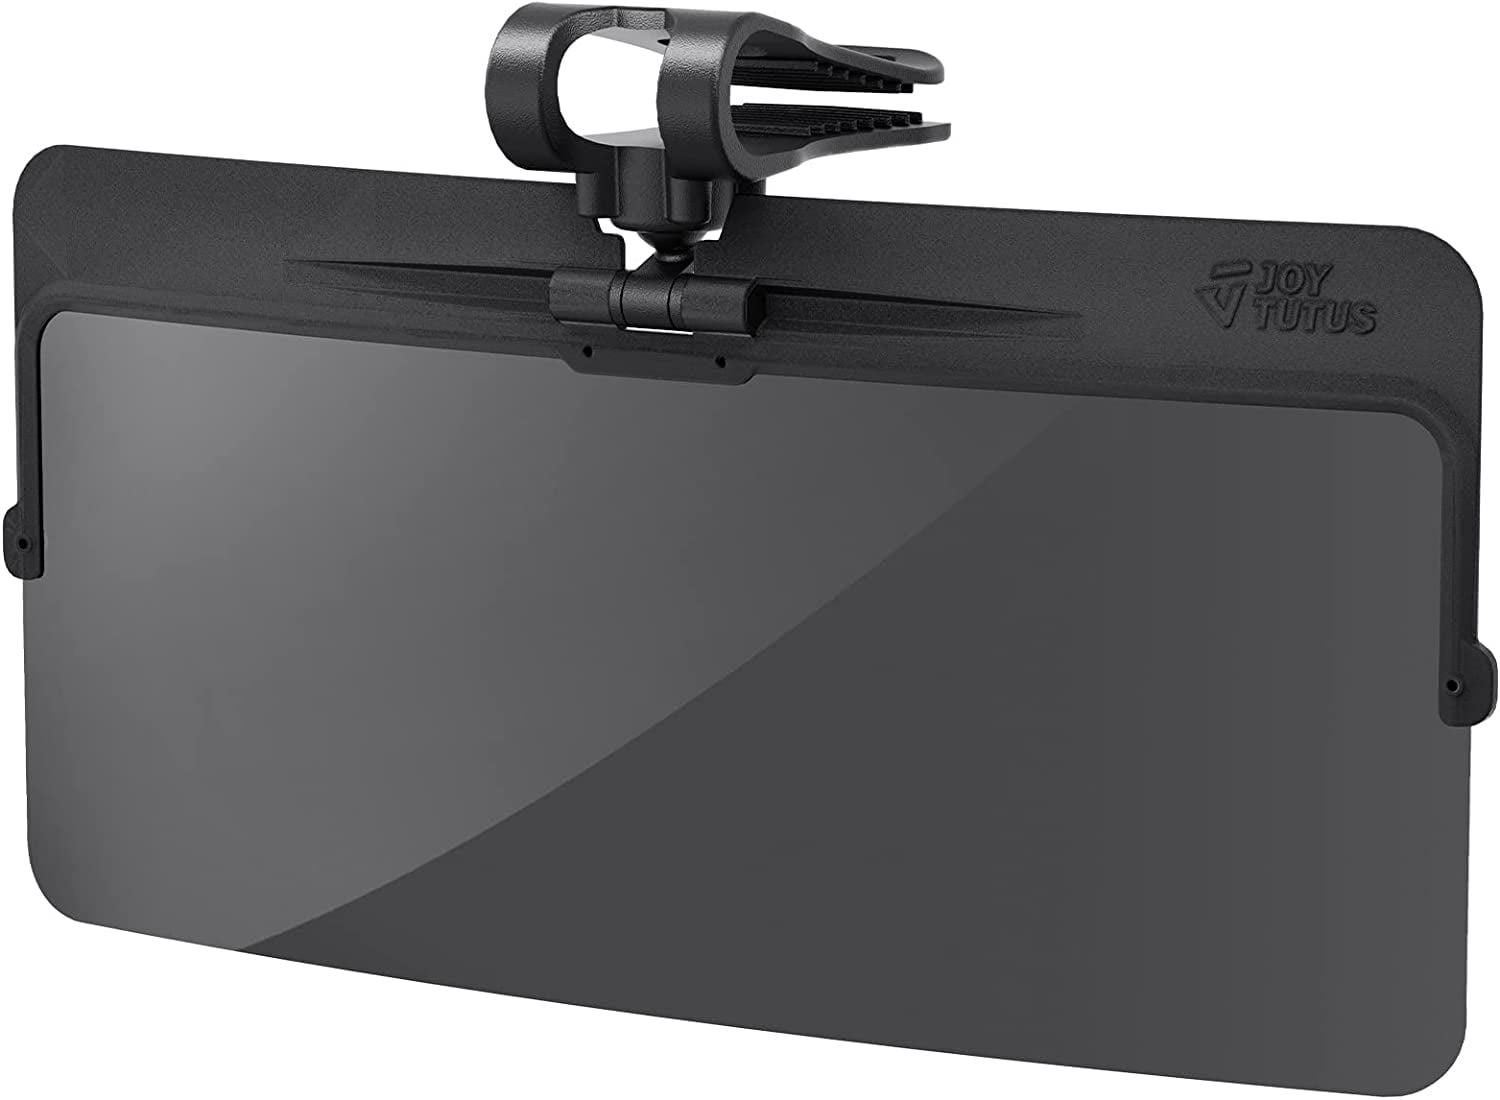 Sliding Car Visor Extender with Tinted Screen to Reduce Glare